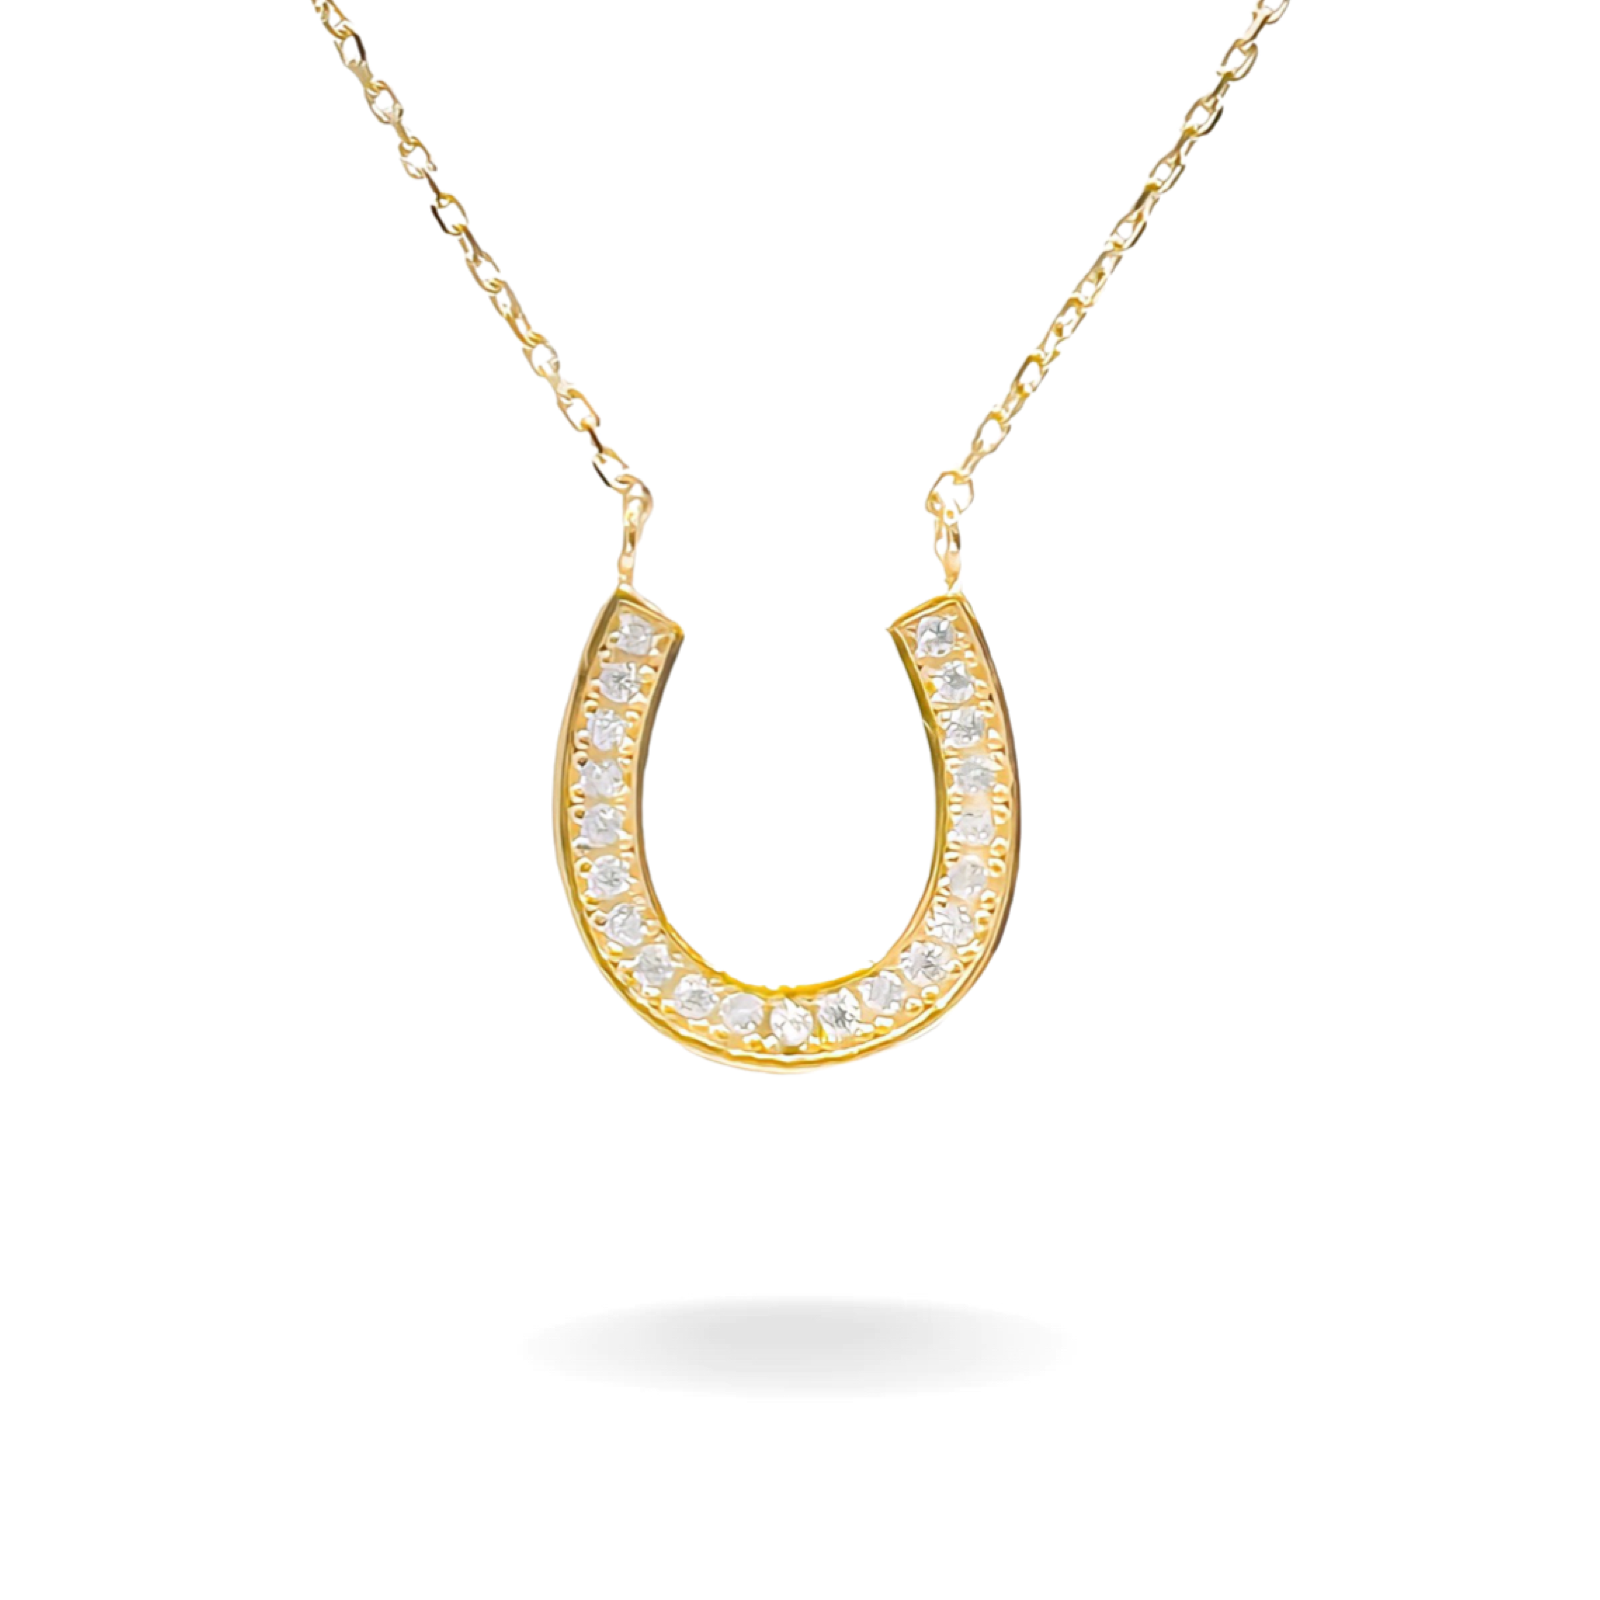 Buy The Protector Horse Shoe Charm Necklace In 925 Silver from Shaya by  CaratLane